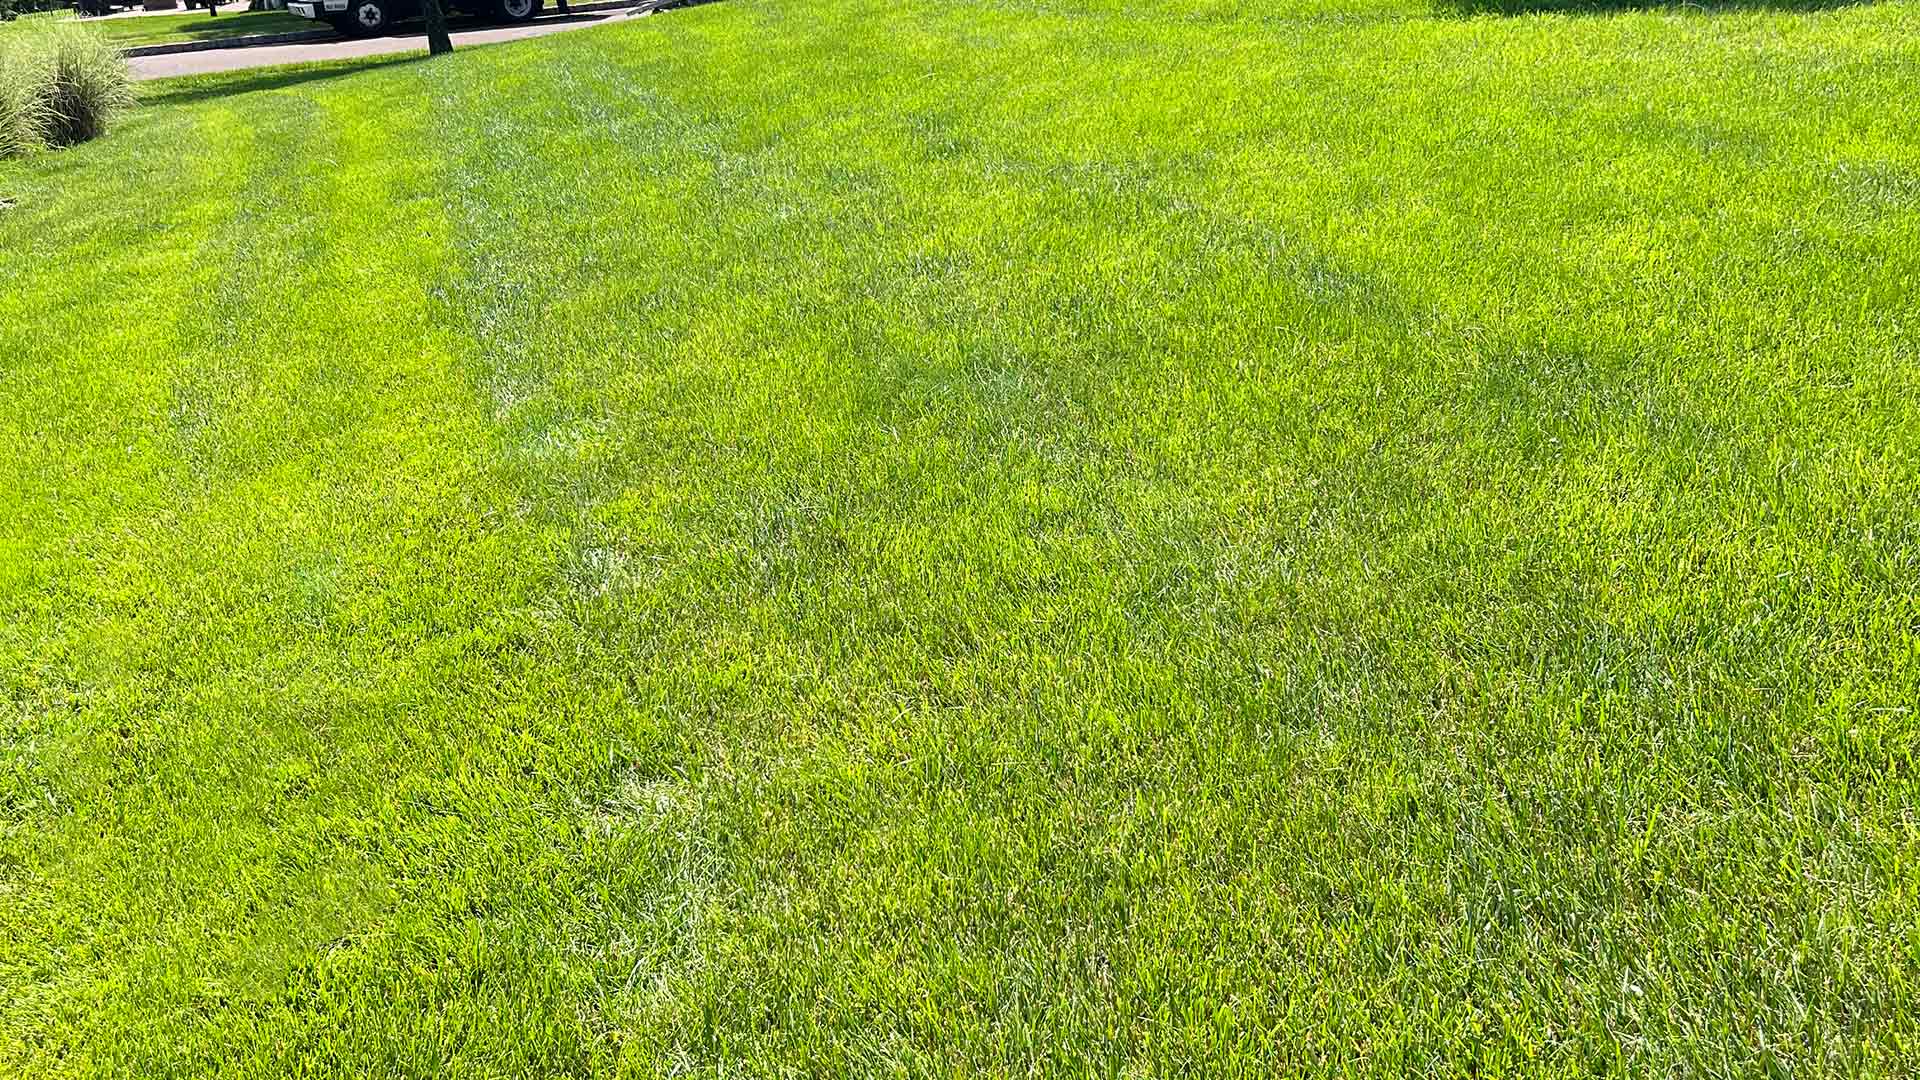 Thick, green lawn grass up close at a home in Abington Township, PA.